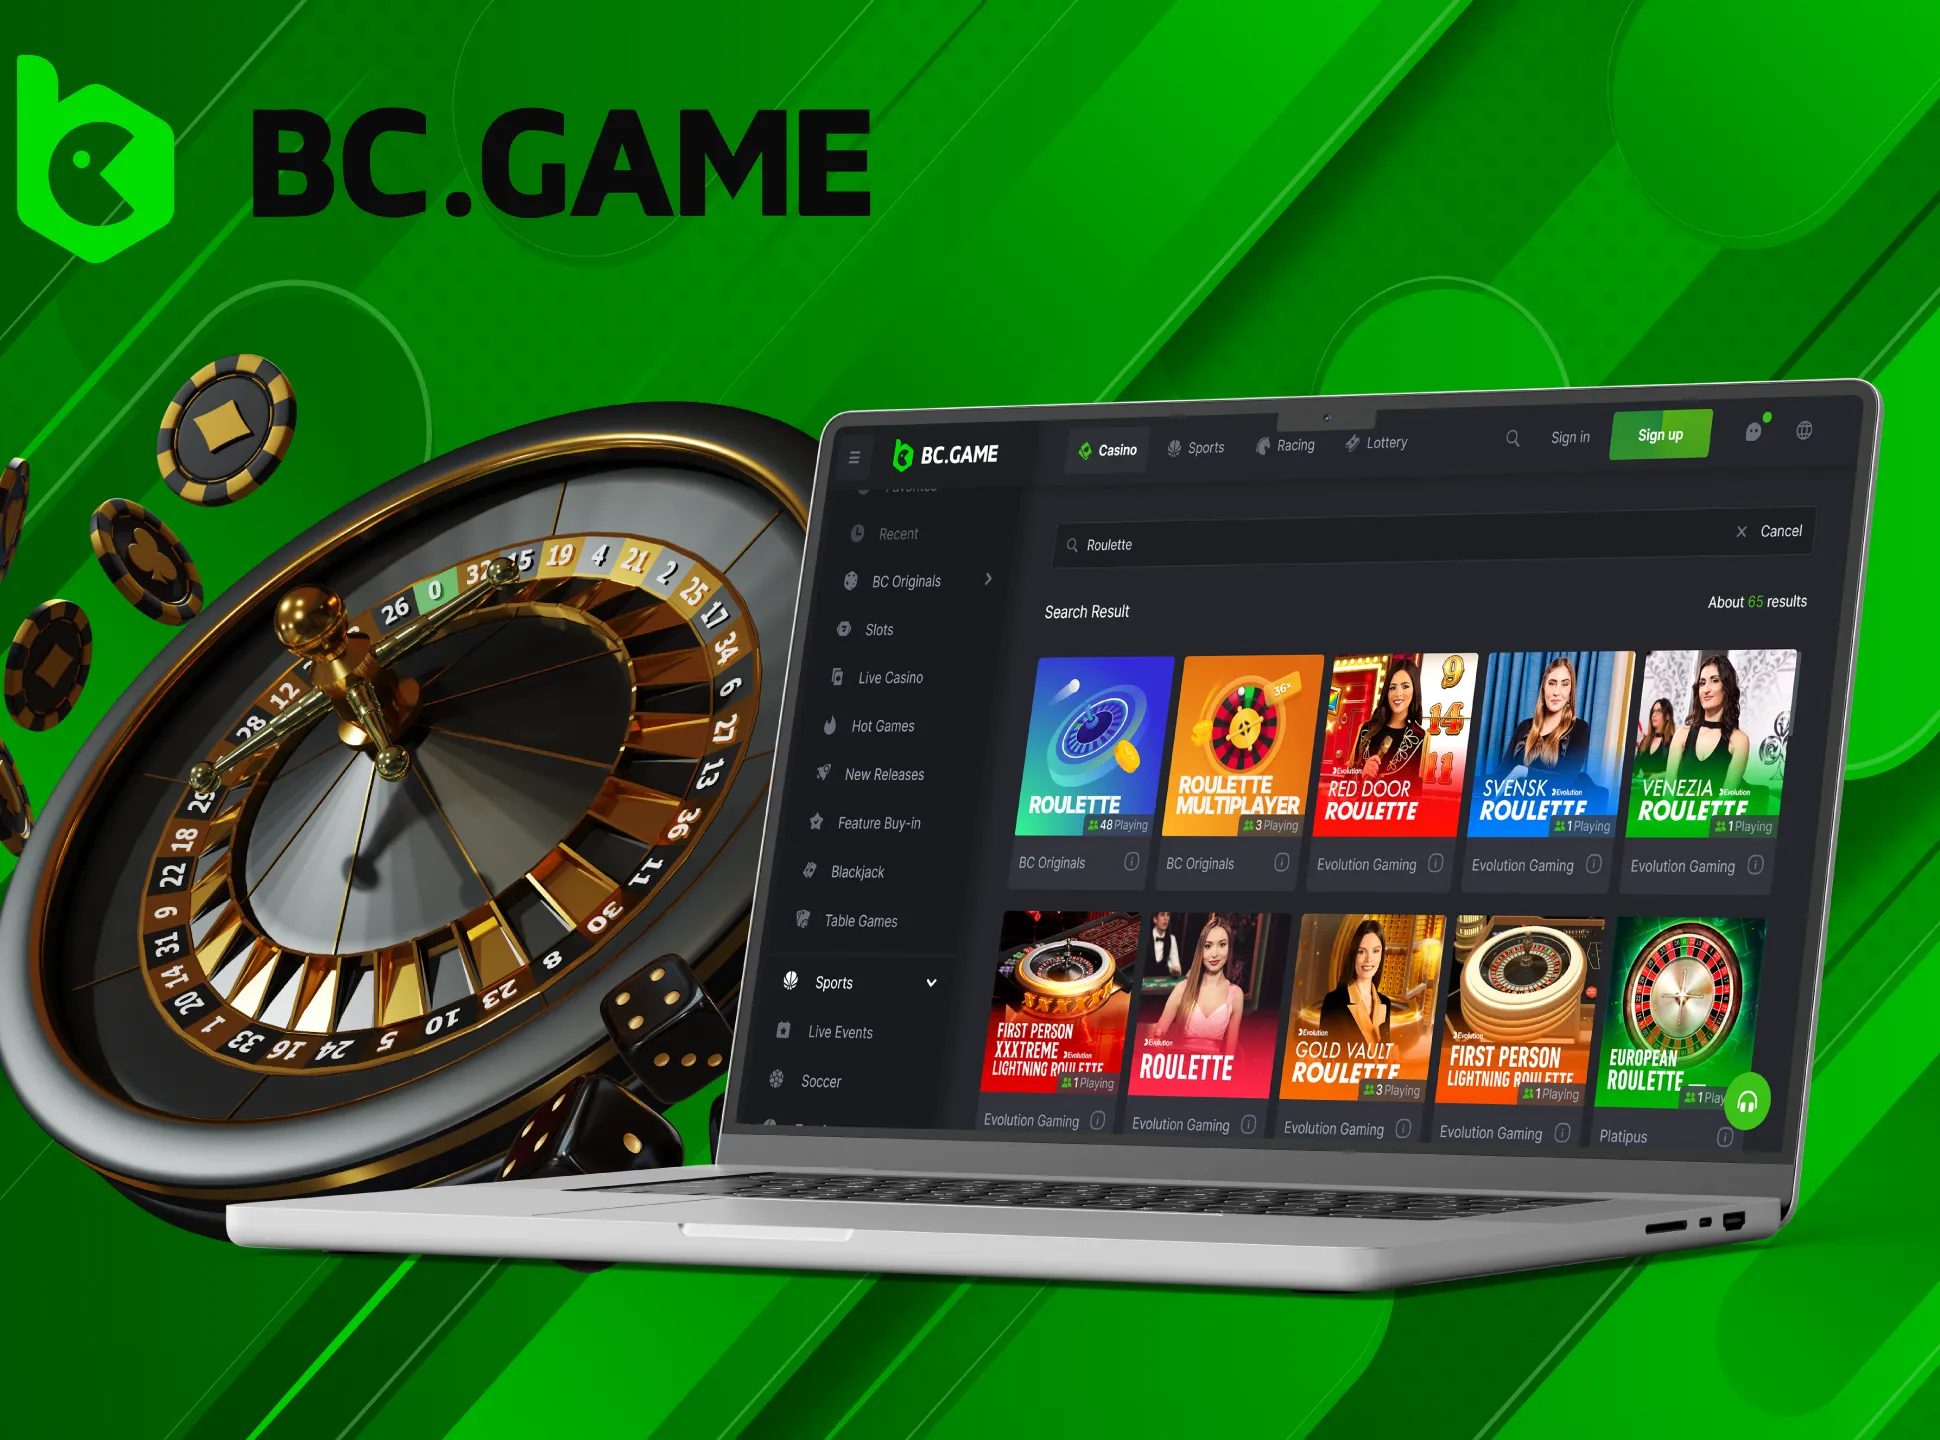 Exciting roulette from BC Game Casino is waiting for your bold bets.